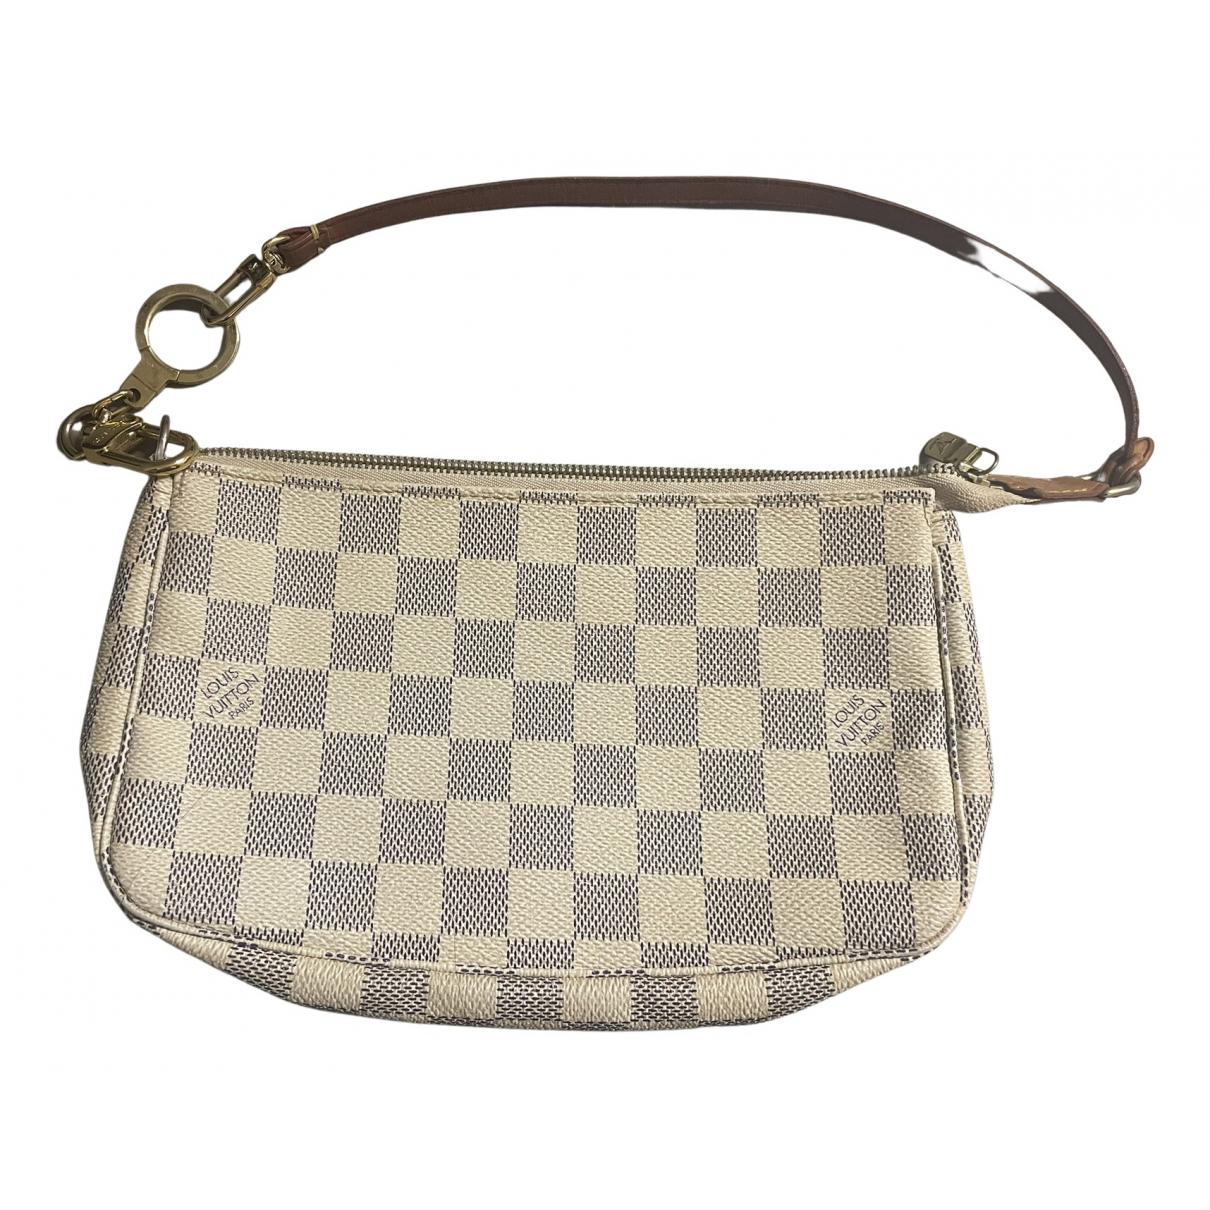 Siracusa leather crossbody bag Louis Vuitton Beige in Leather - 33965182